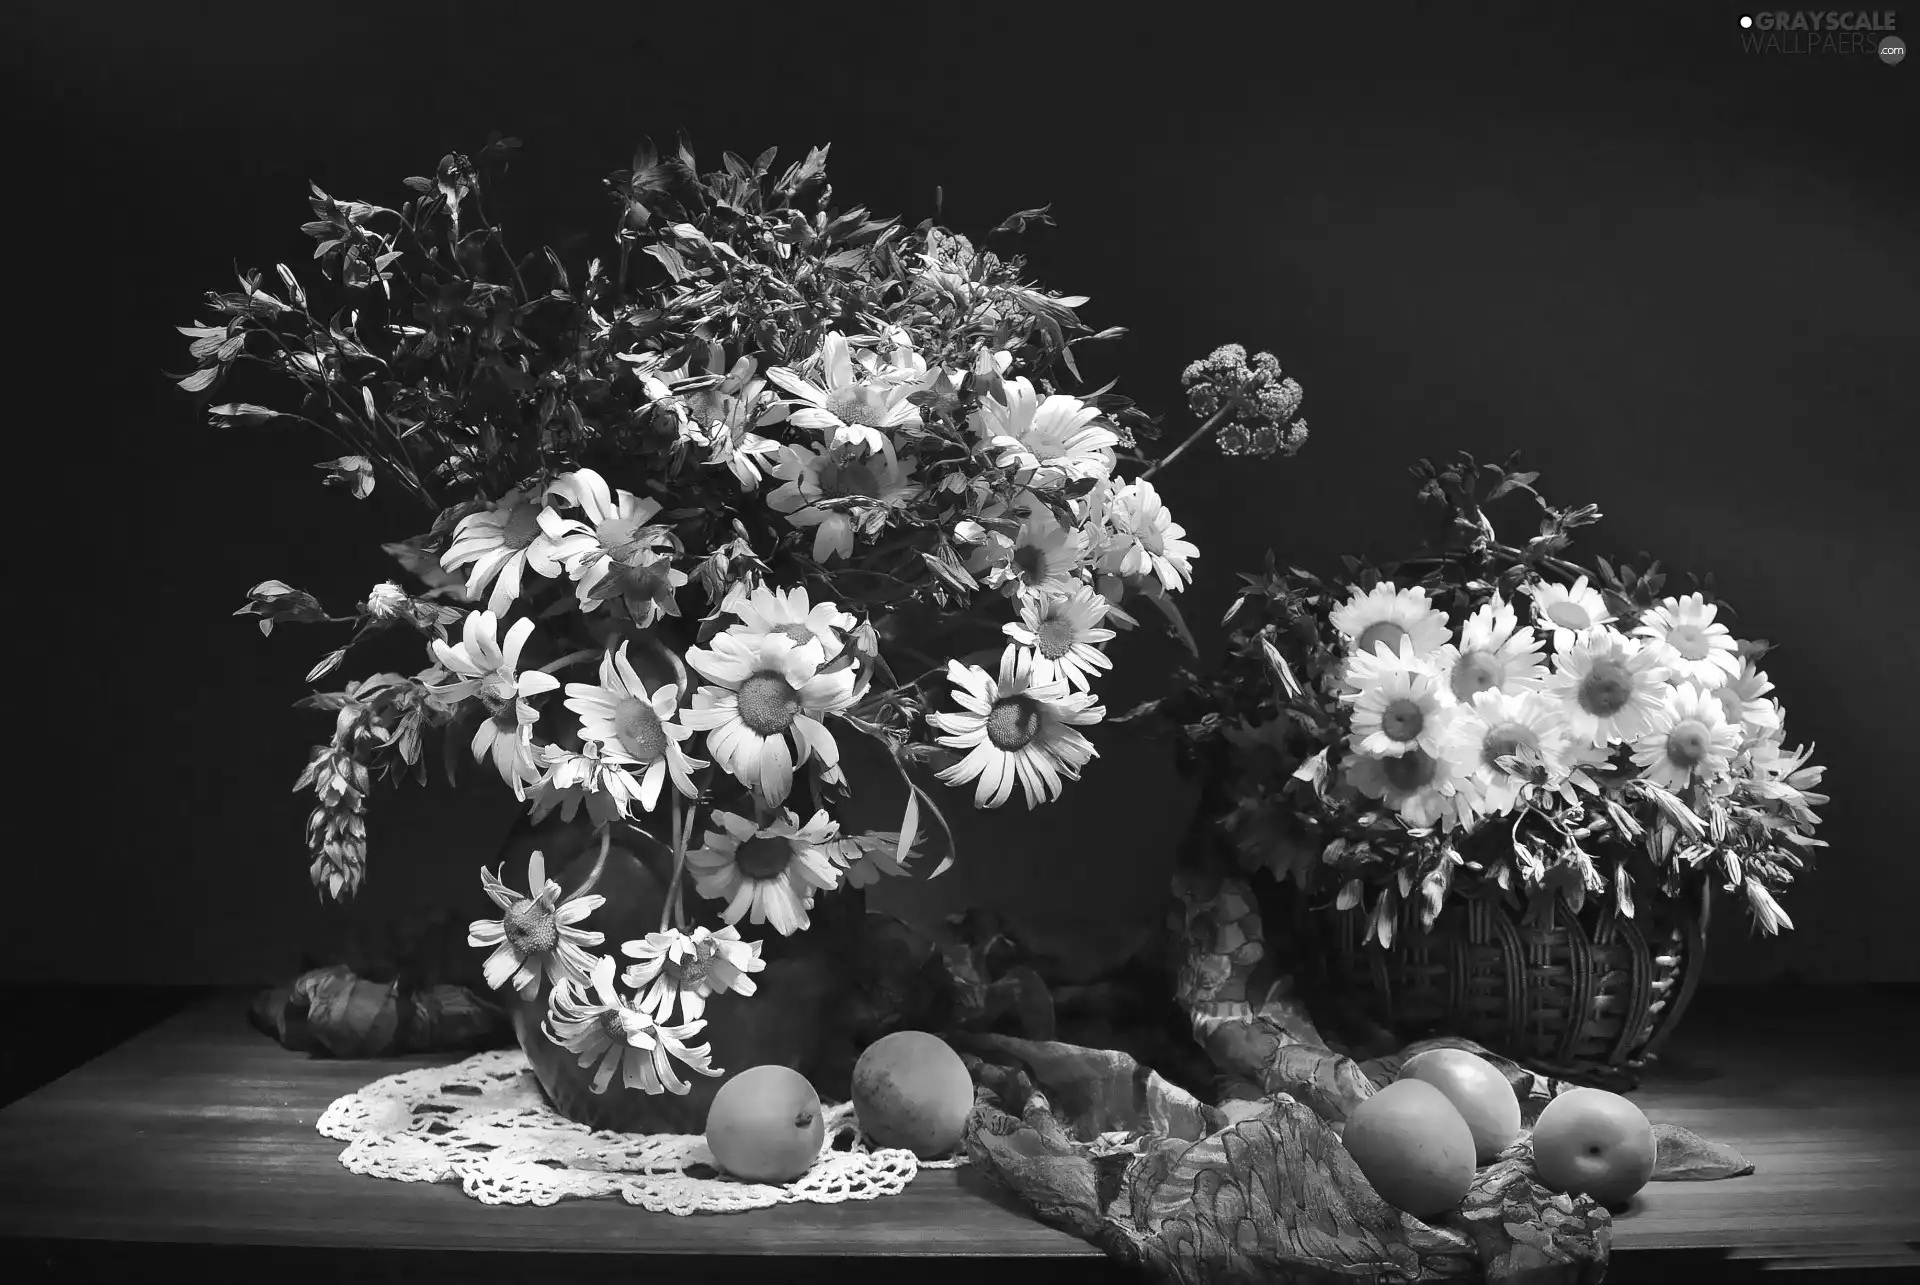 apricots, Daisy, wild, flowers, Bouquets